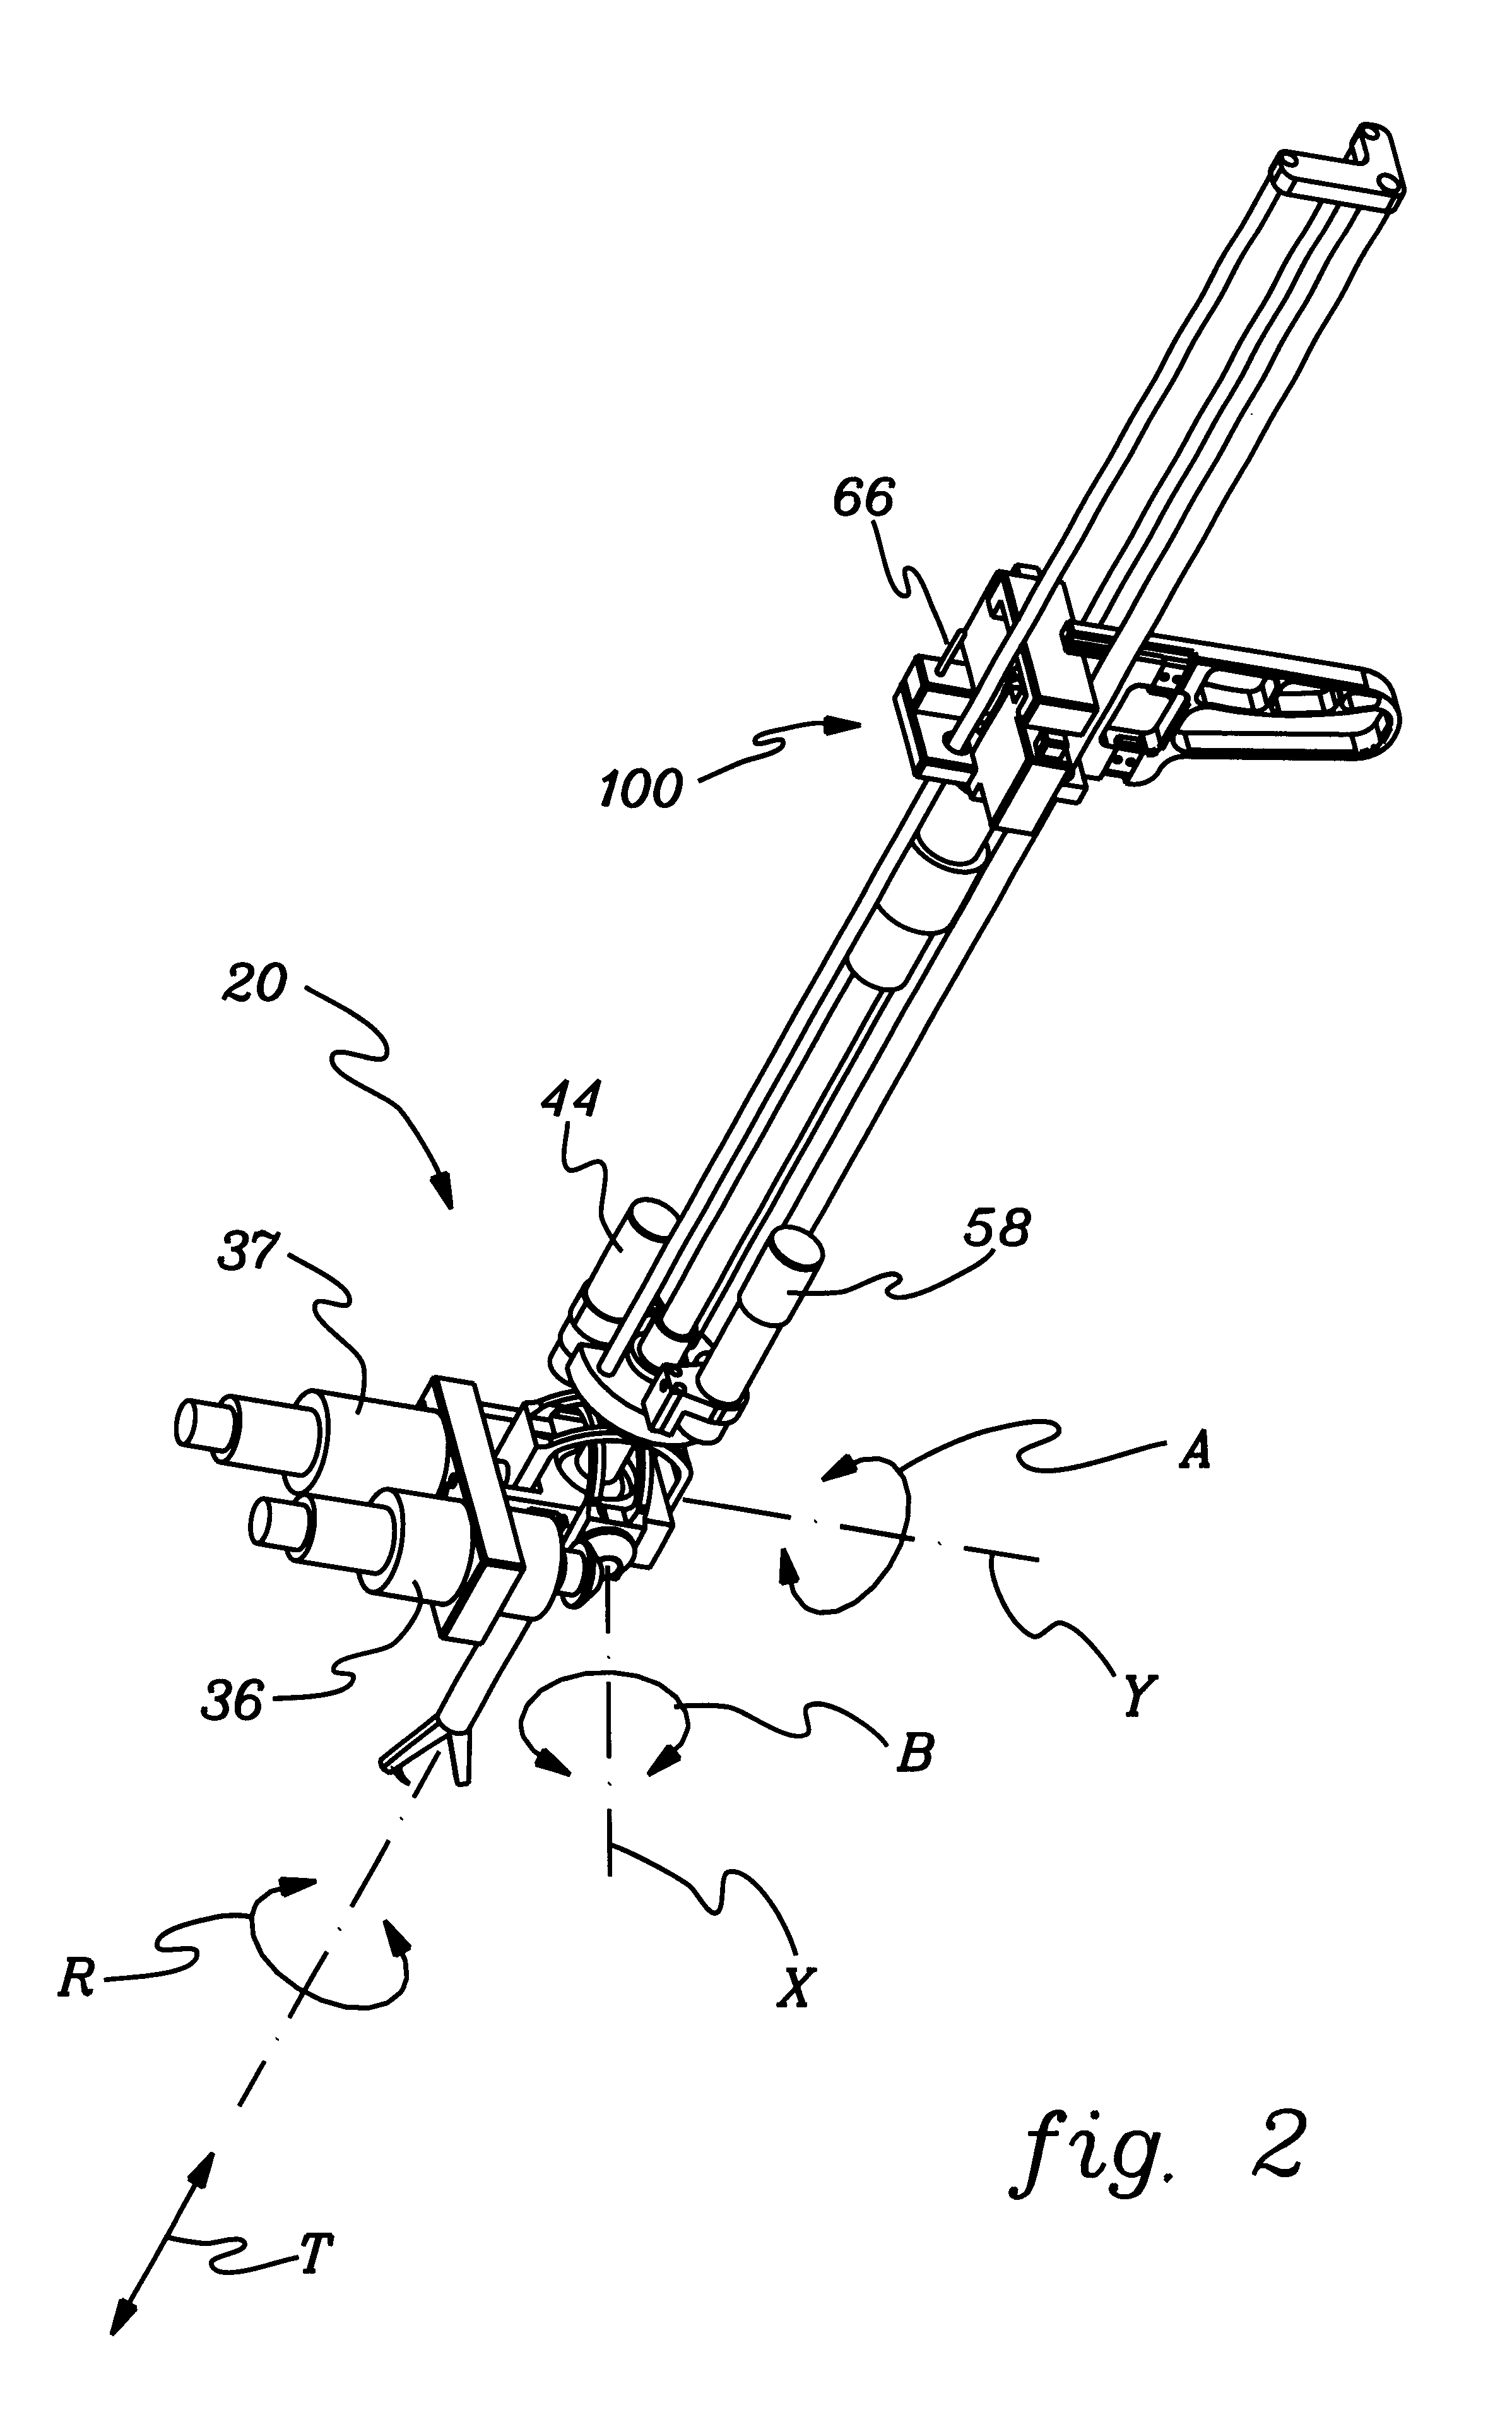 Robotic system, docking station, and surgical tool for collaborative control in minimally invasive surgery